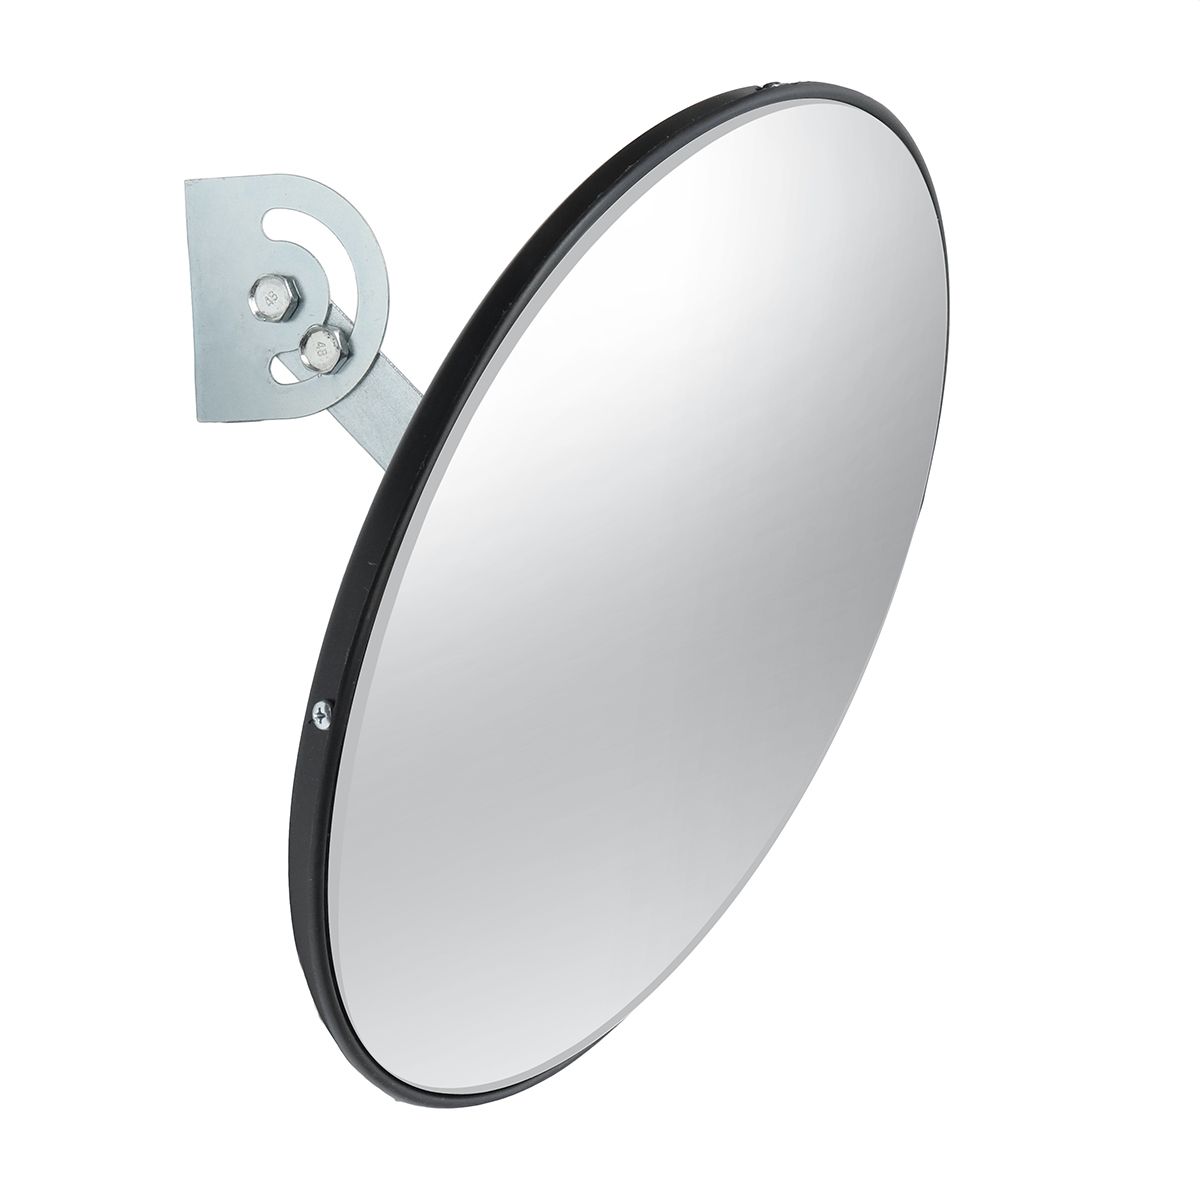 Wide-Angle-Curved-Convex-Security-Car-Blind-Spot-Mirror-For-Indoor-Burglar-Traffic-Signal-Roadway-Sa-1559655